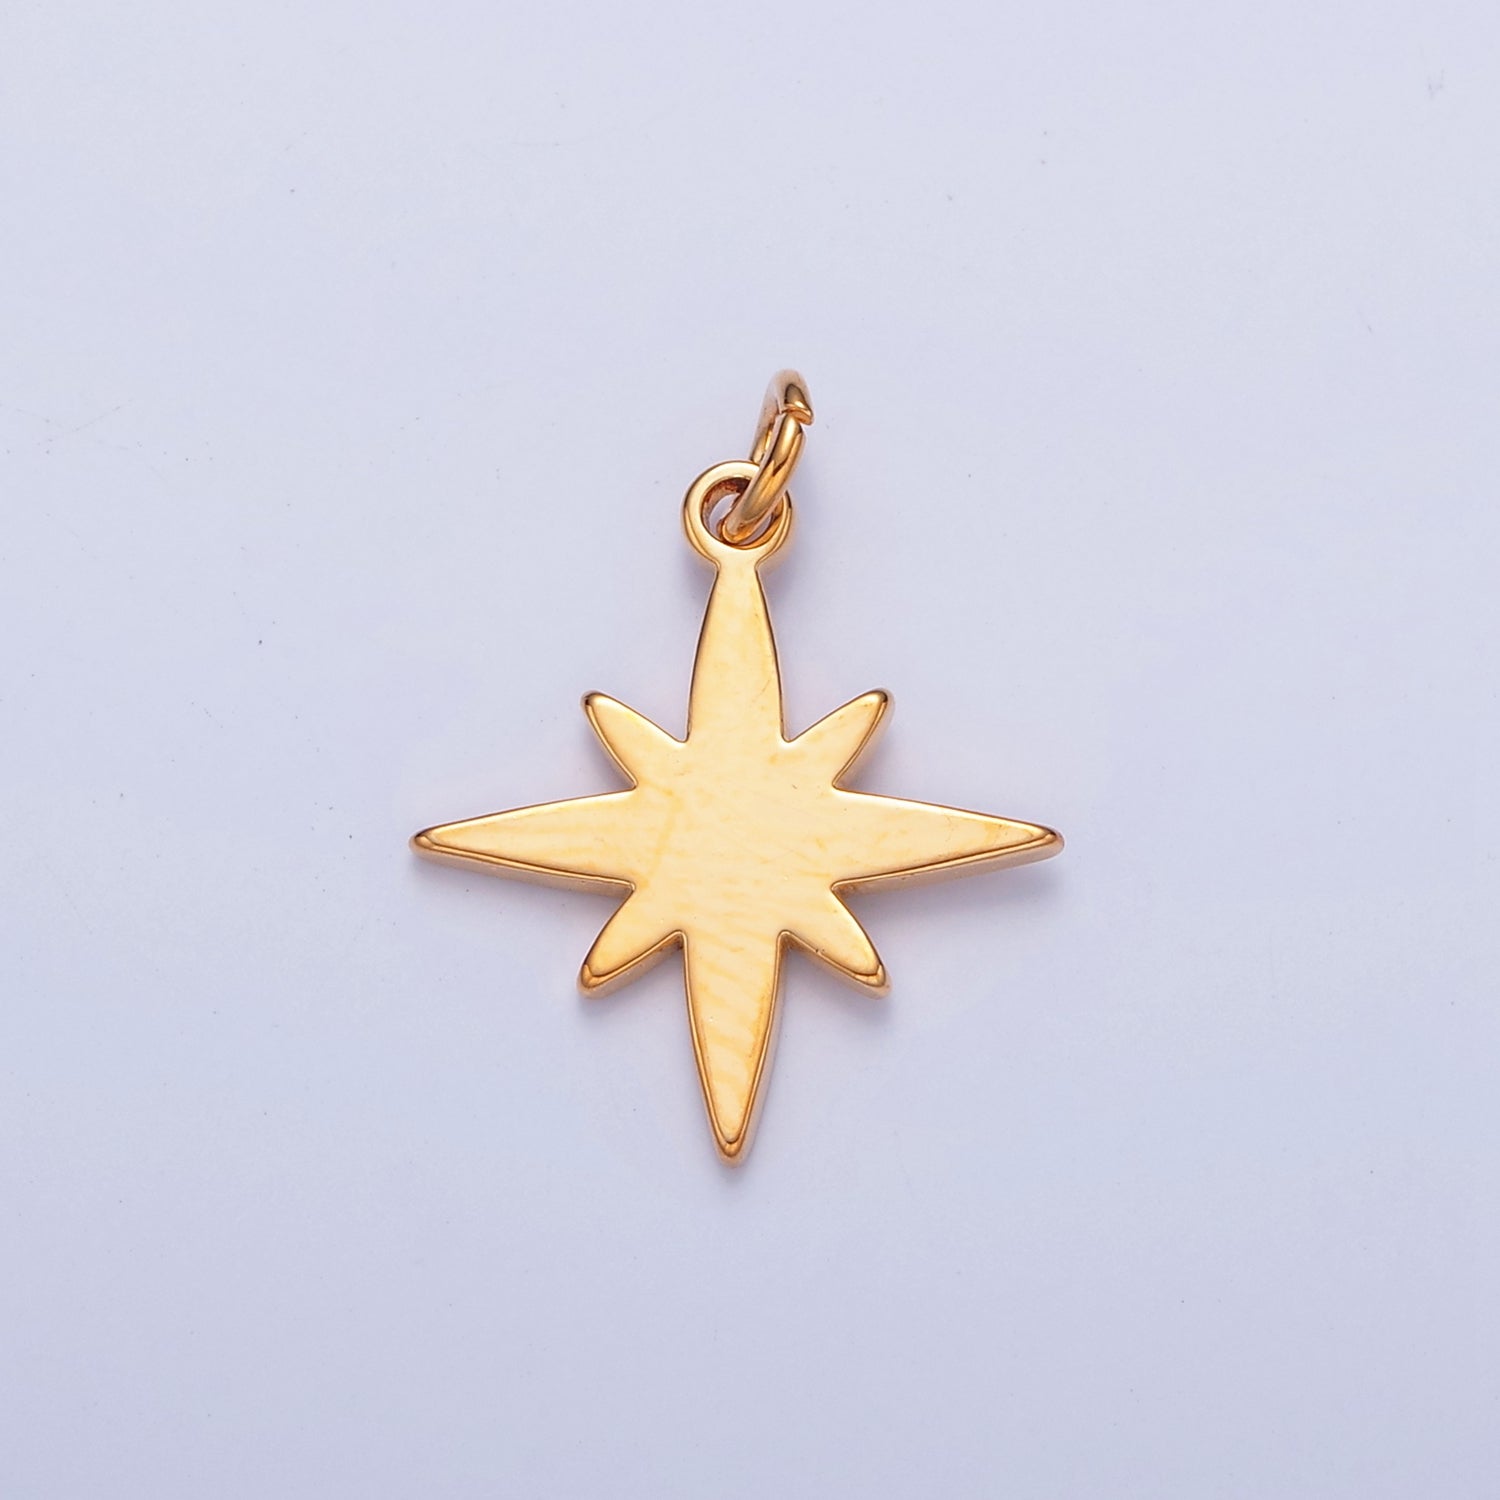 Dainty Gold Flat Polaris Northstar Pendant Only Charm for Necklace Bracelet Earring 14K or 24K Gold Filled W-461 - DLUXCA